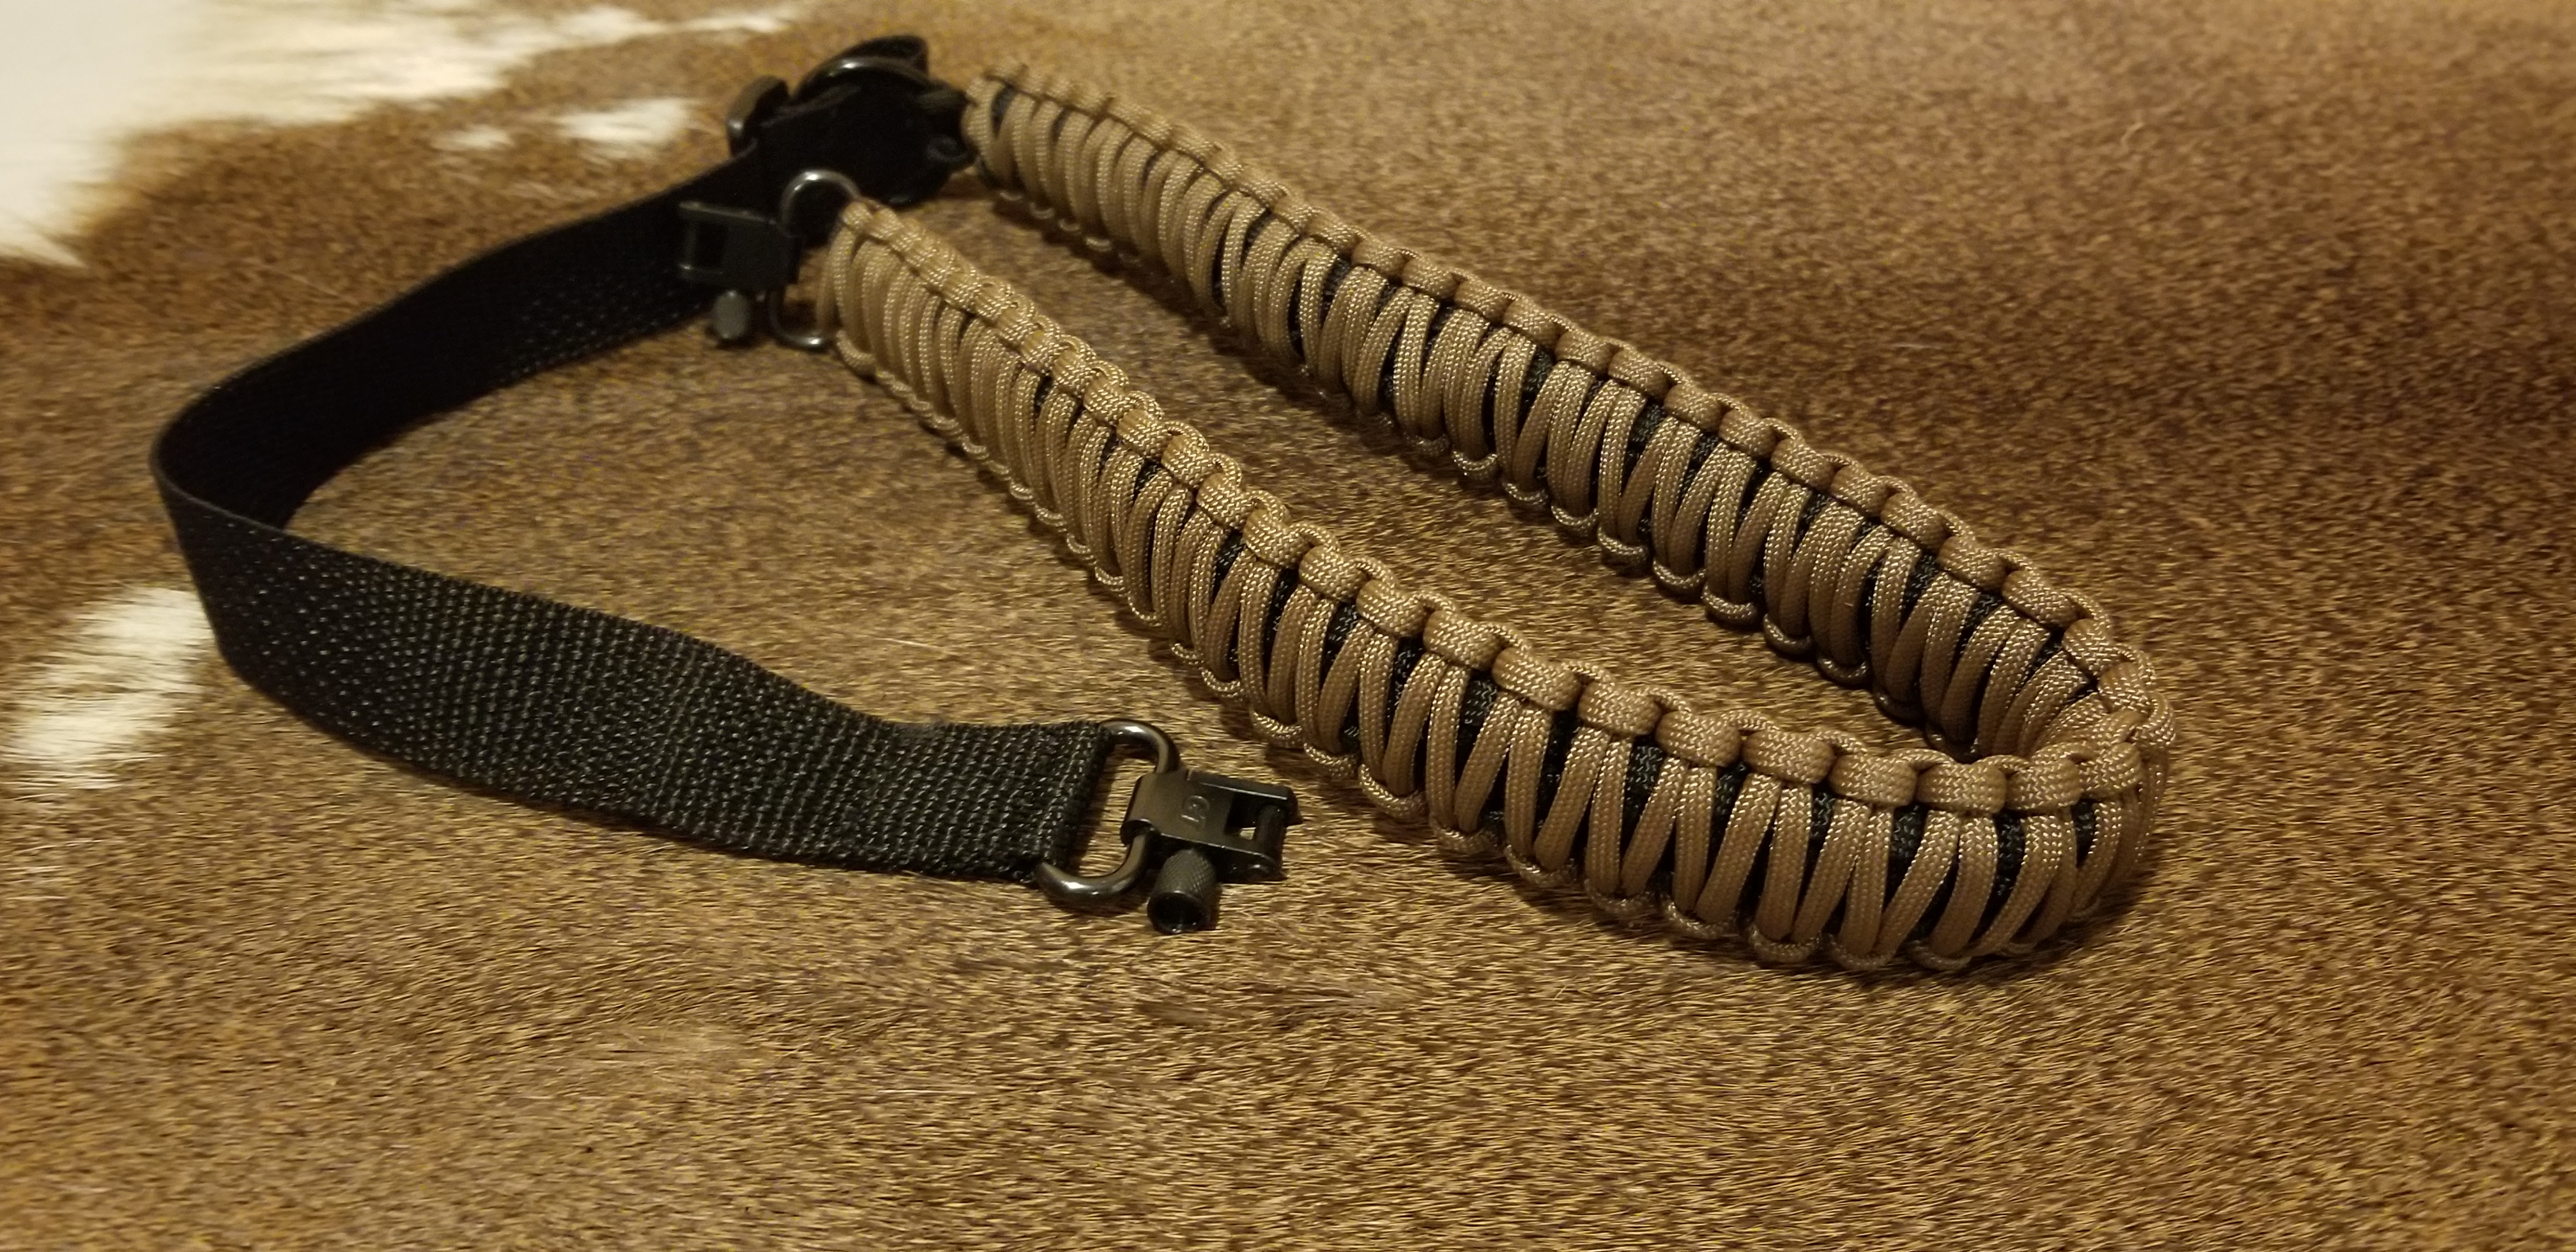 BLACK & STARRY NITE  ONE/TWO POINT ADJUSTABLE GUN SLING PARACORD 